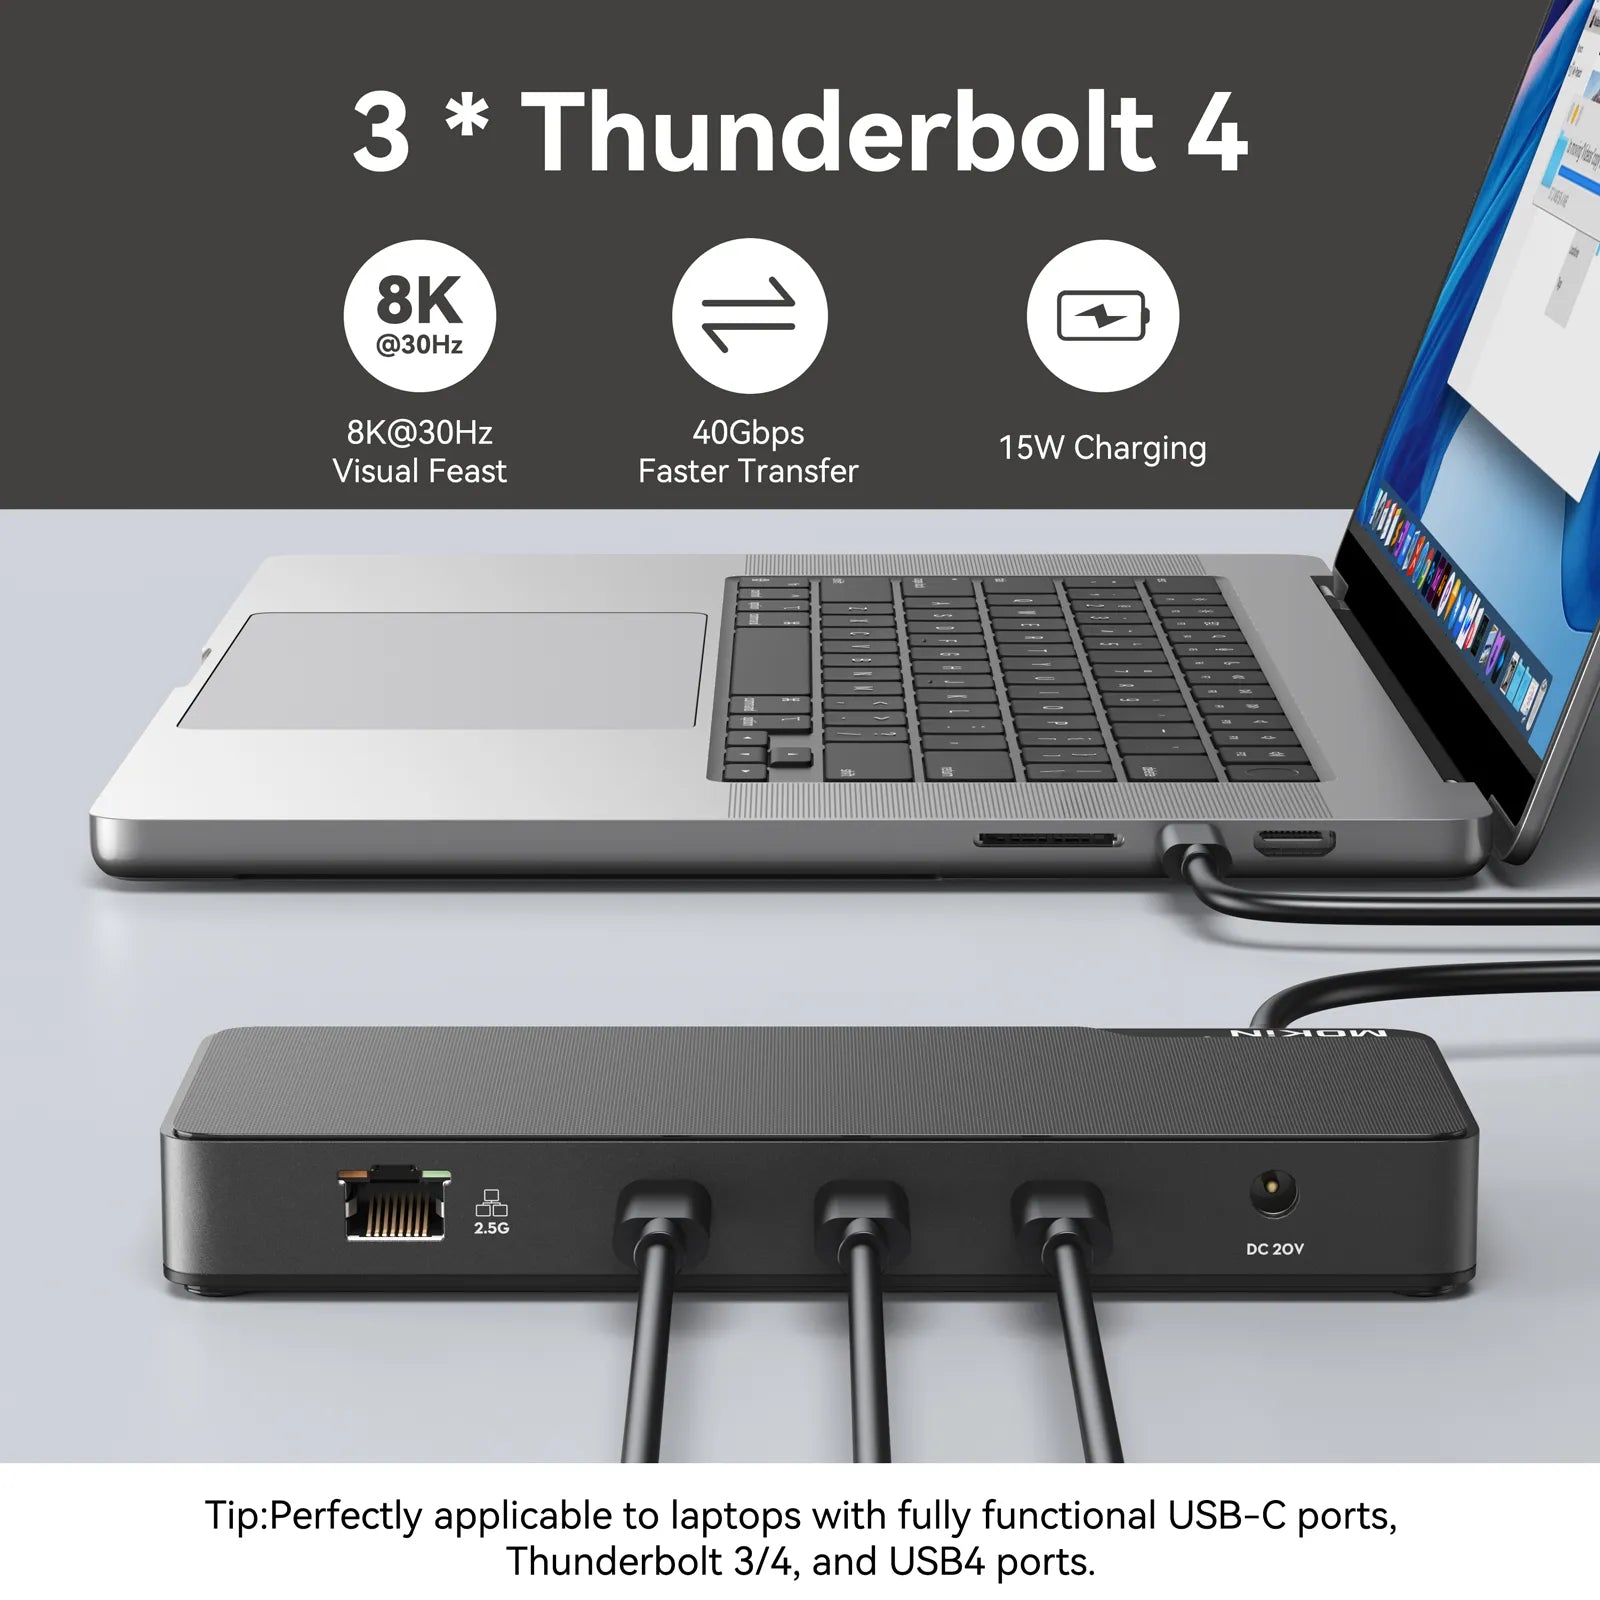 3*Thunderbolt 4 Ports Function(8K@30Hz Visual Feast,40Gbps Faster Transfer,15W Charging)